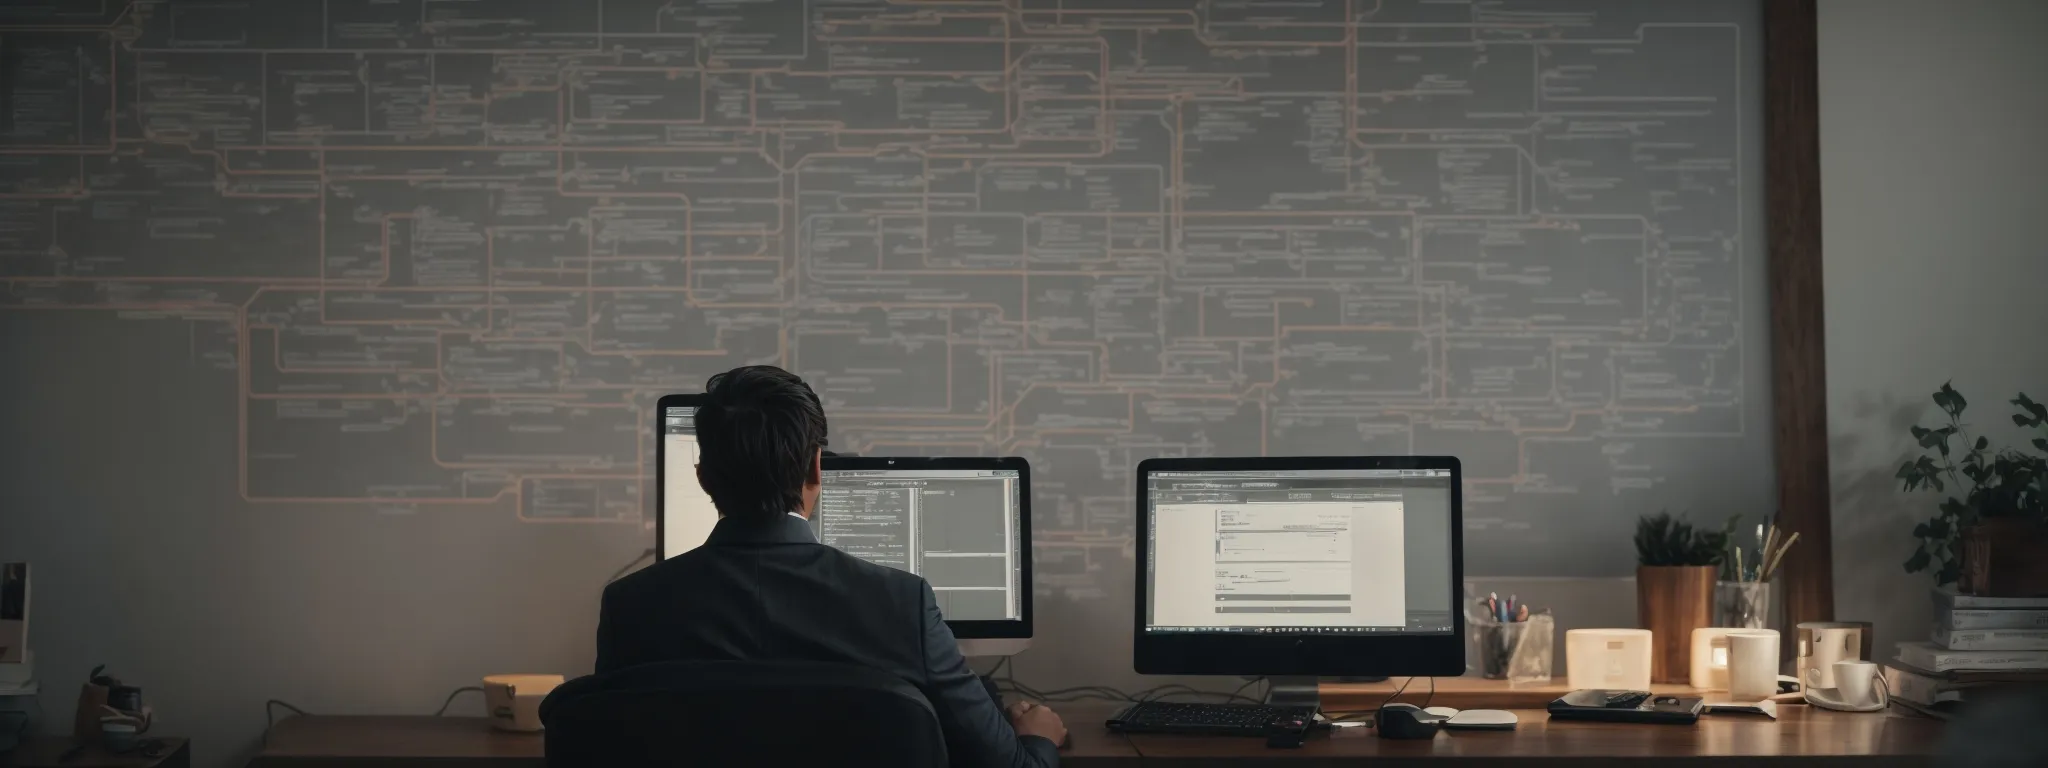 a web designer intently studying a dynamic flowchart representing diverse seo strategies on a computer screen.